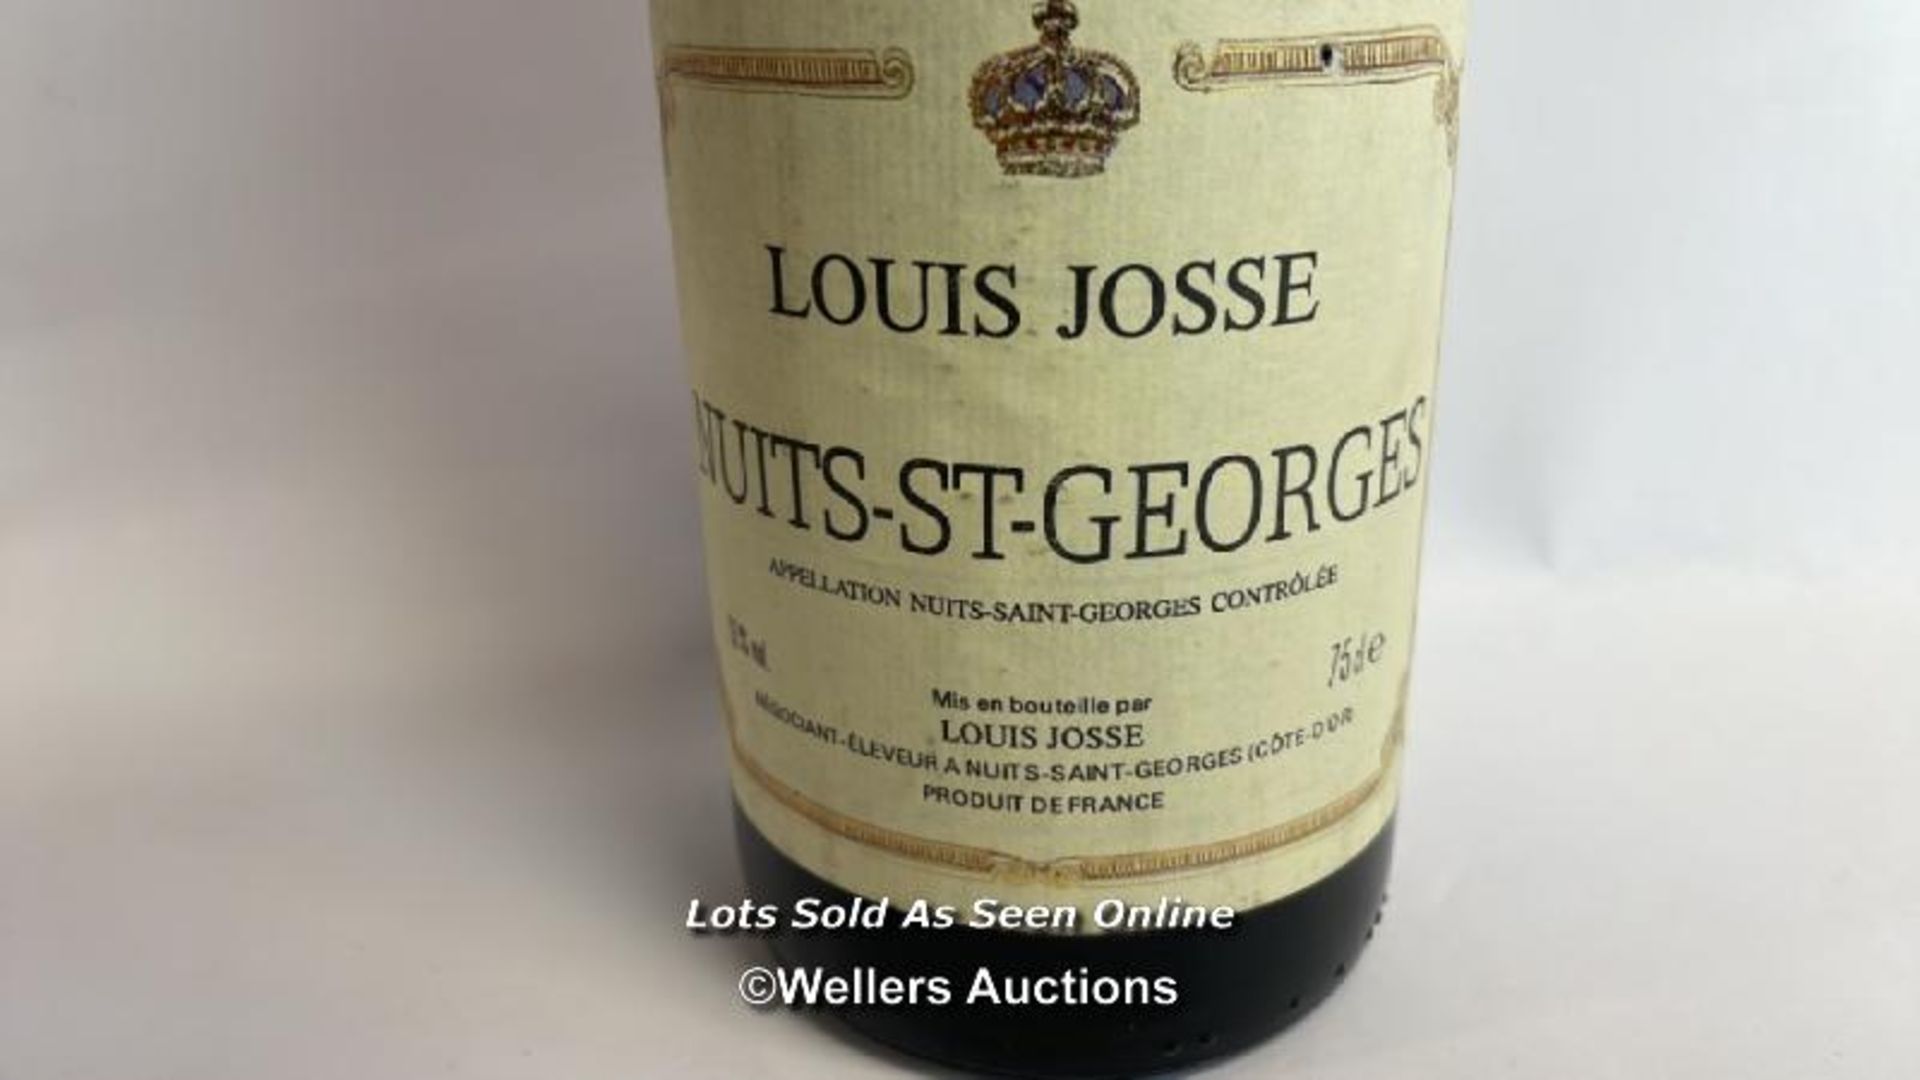 1995 Louis Josse Nuits-St-Georges, 75CL, 13% vol / Please see images for fill level and general - Image 2 of 4